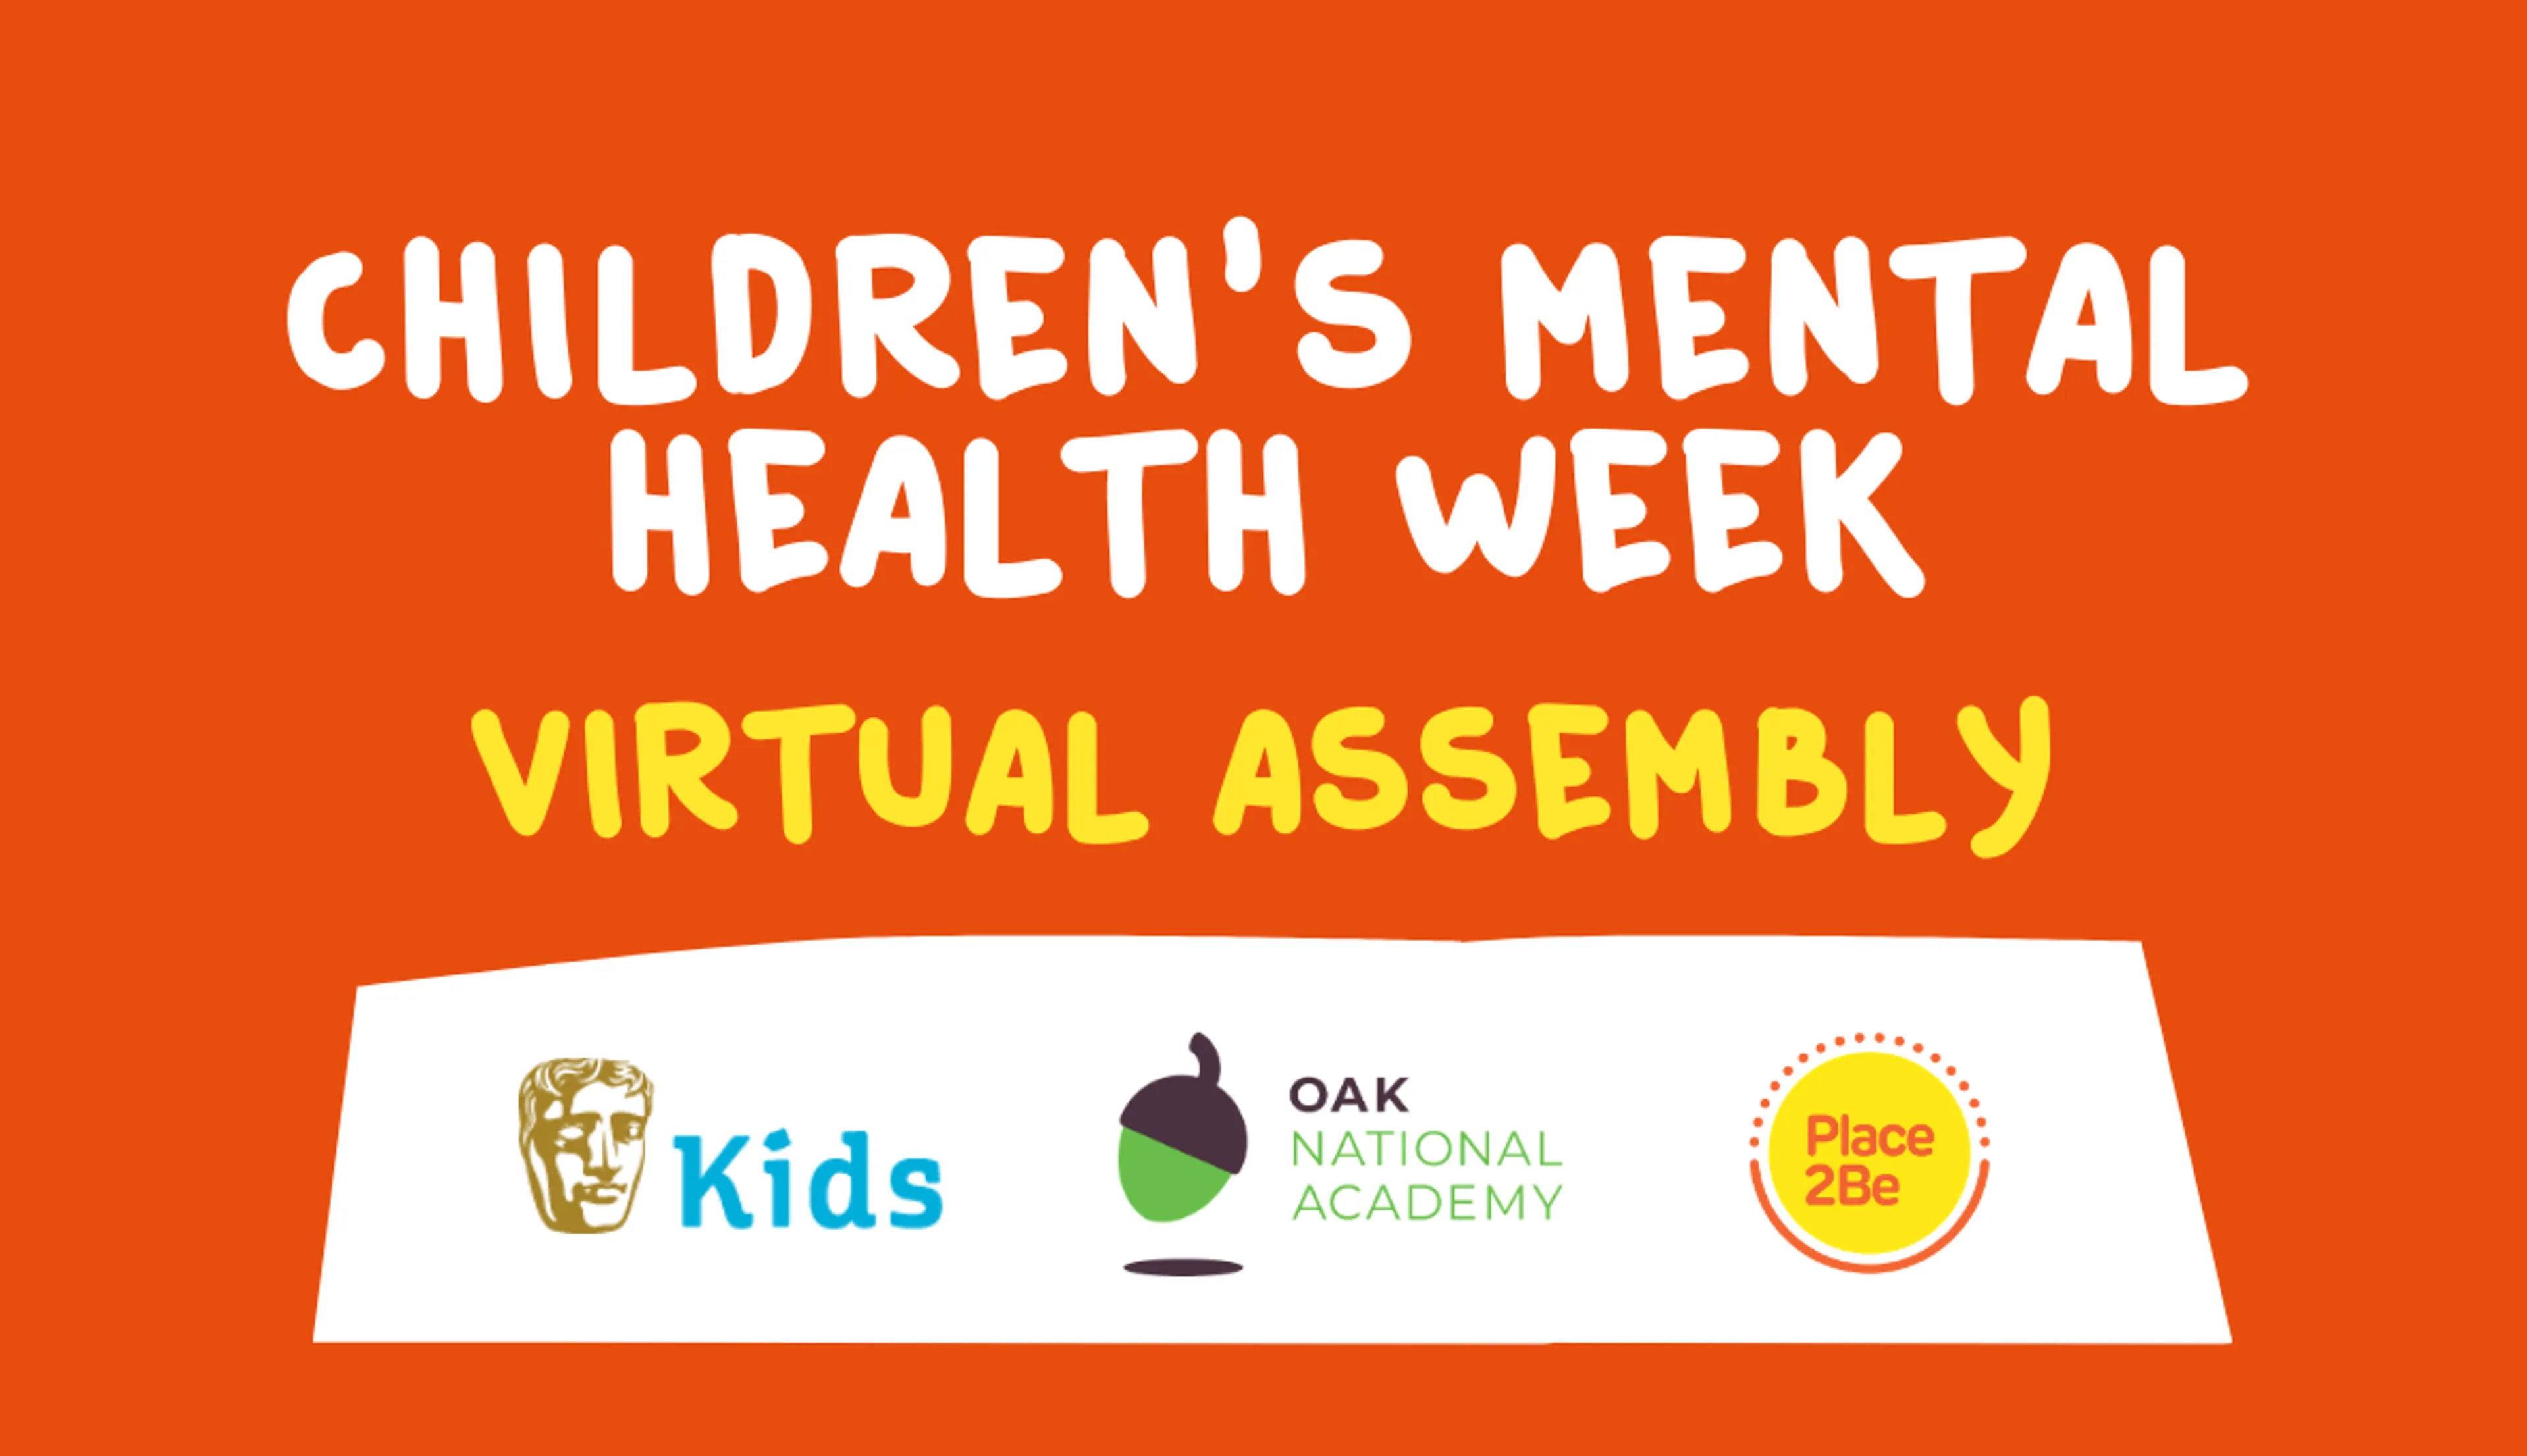 Children's mental health week virtual assembly poster